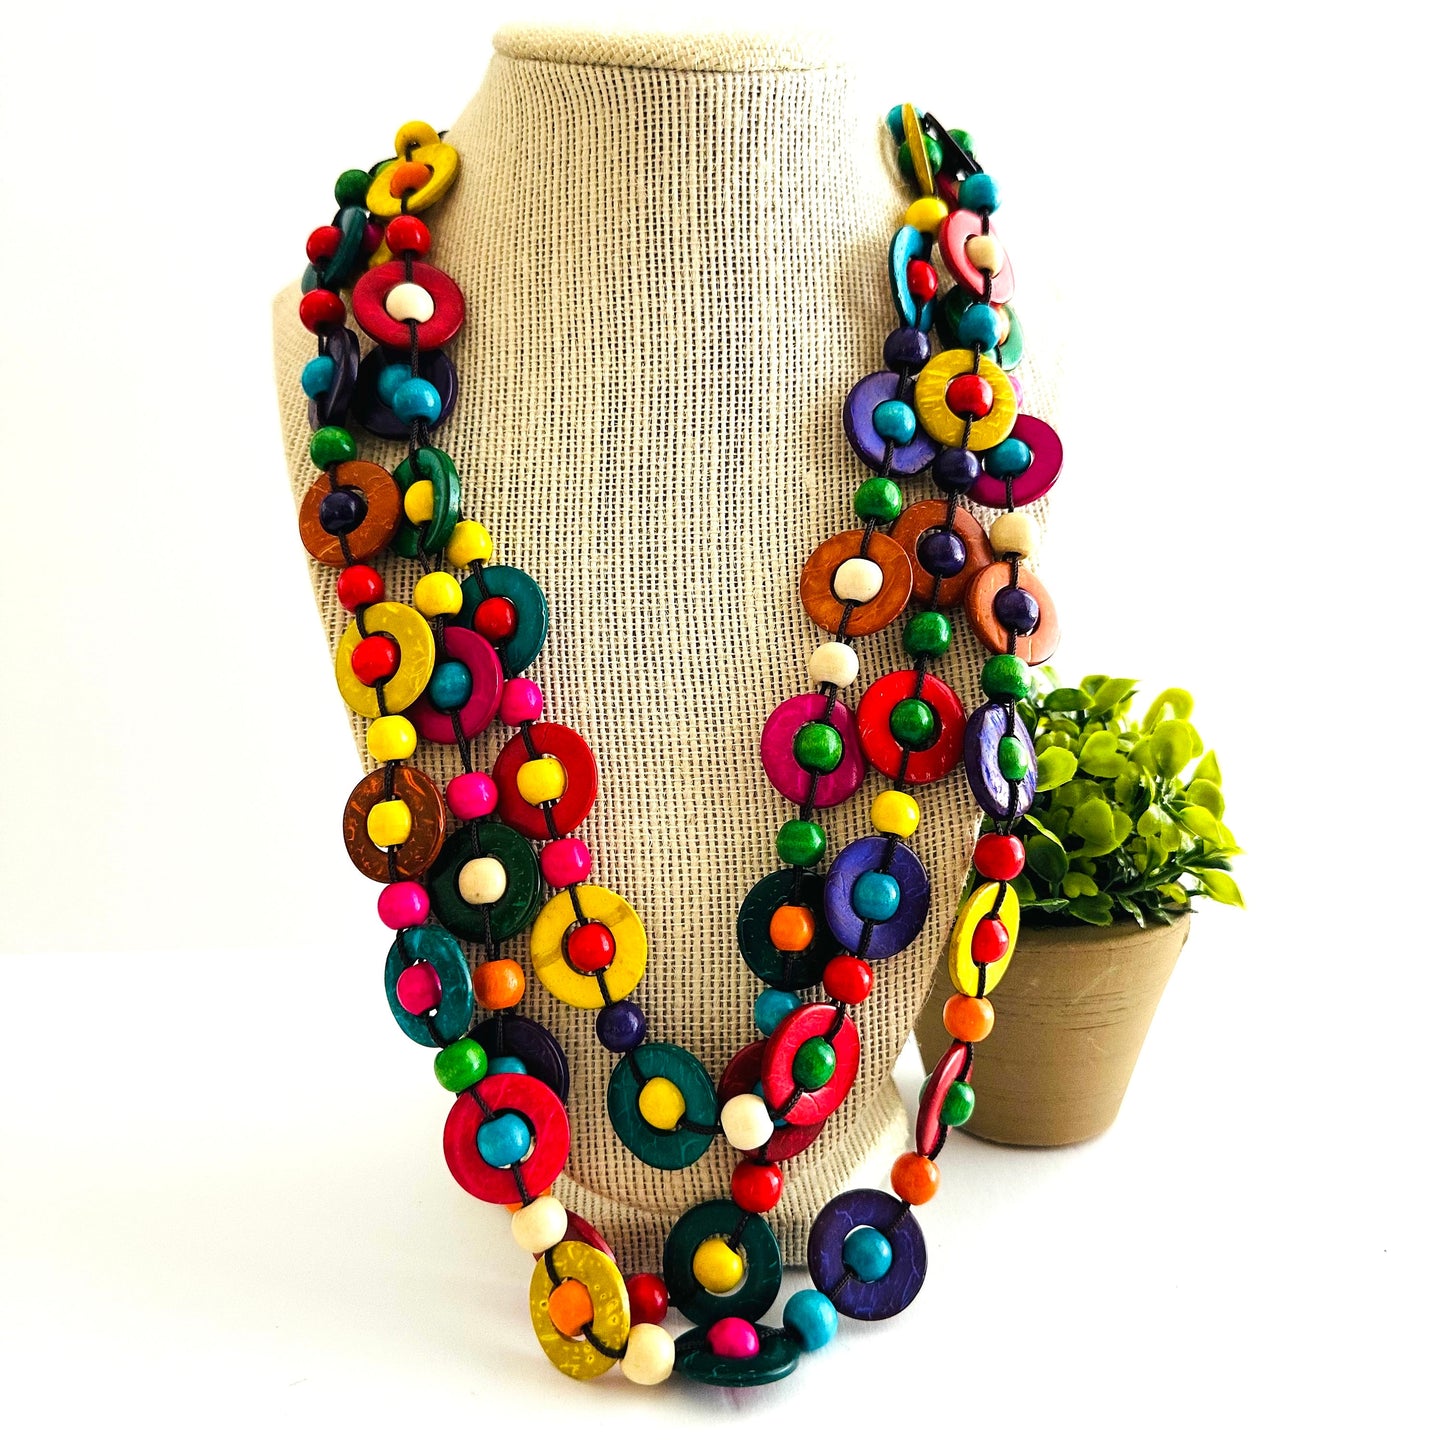 Iconic Frida Inspired Colorful Mexican Necklace Multicolored Multilayered Mexico Jewelry Mexican Folk Art Hand Painted Coconut Shells Collar